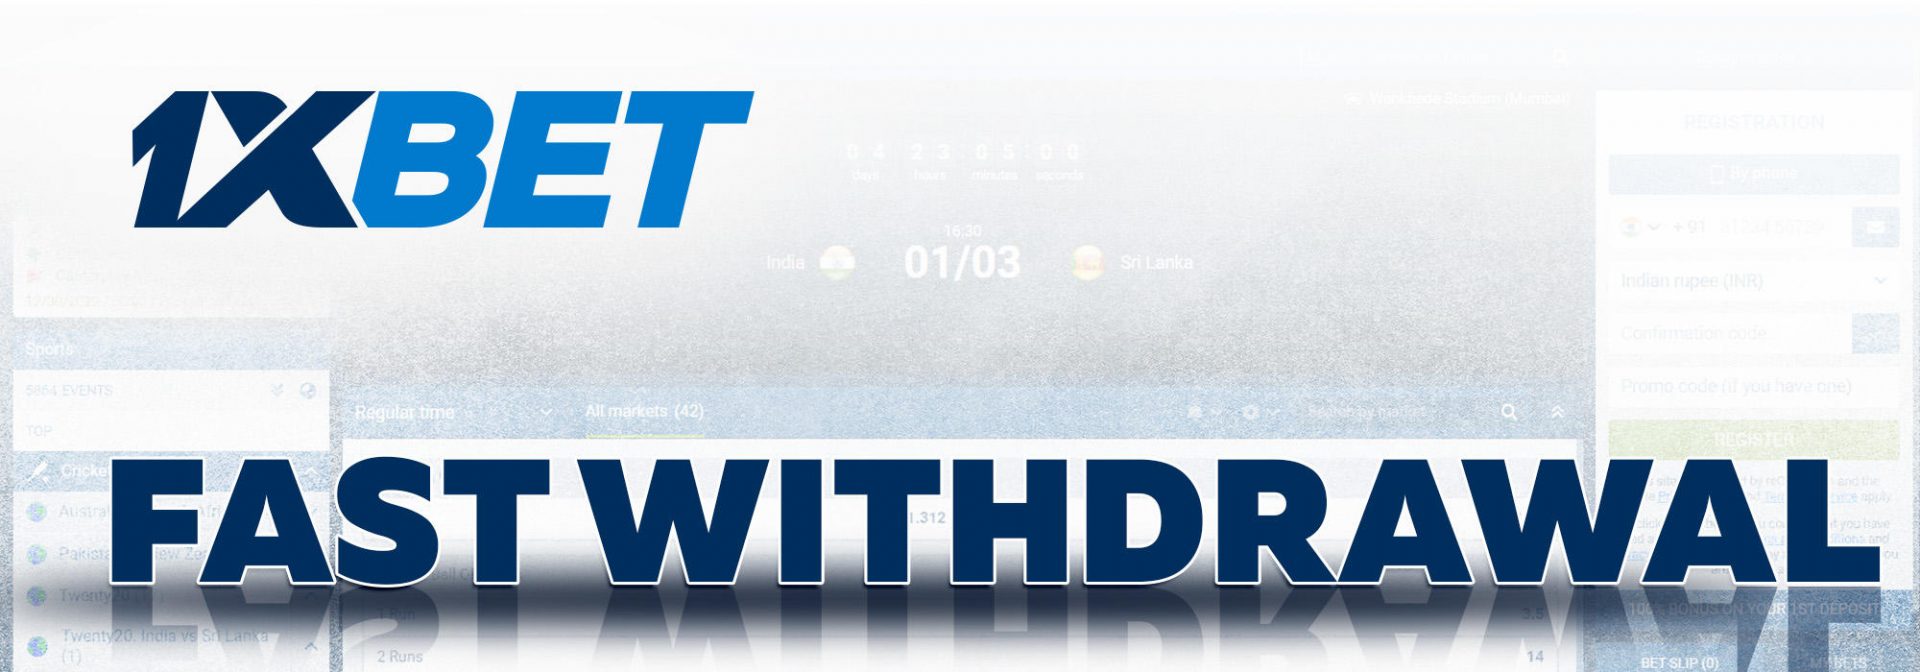 The main withdrawal rules set by 1xBet